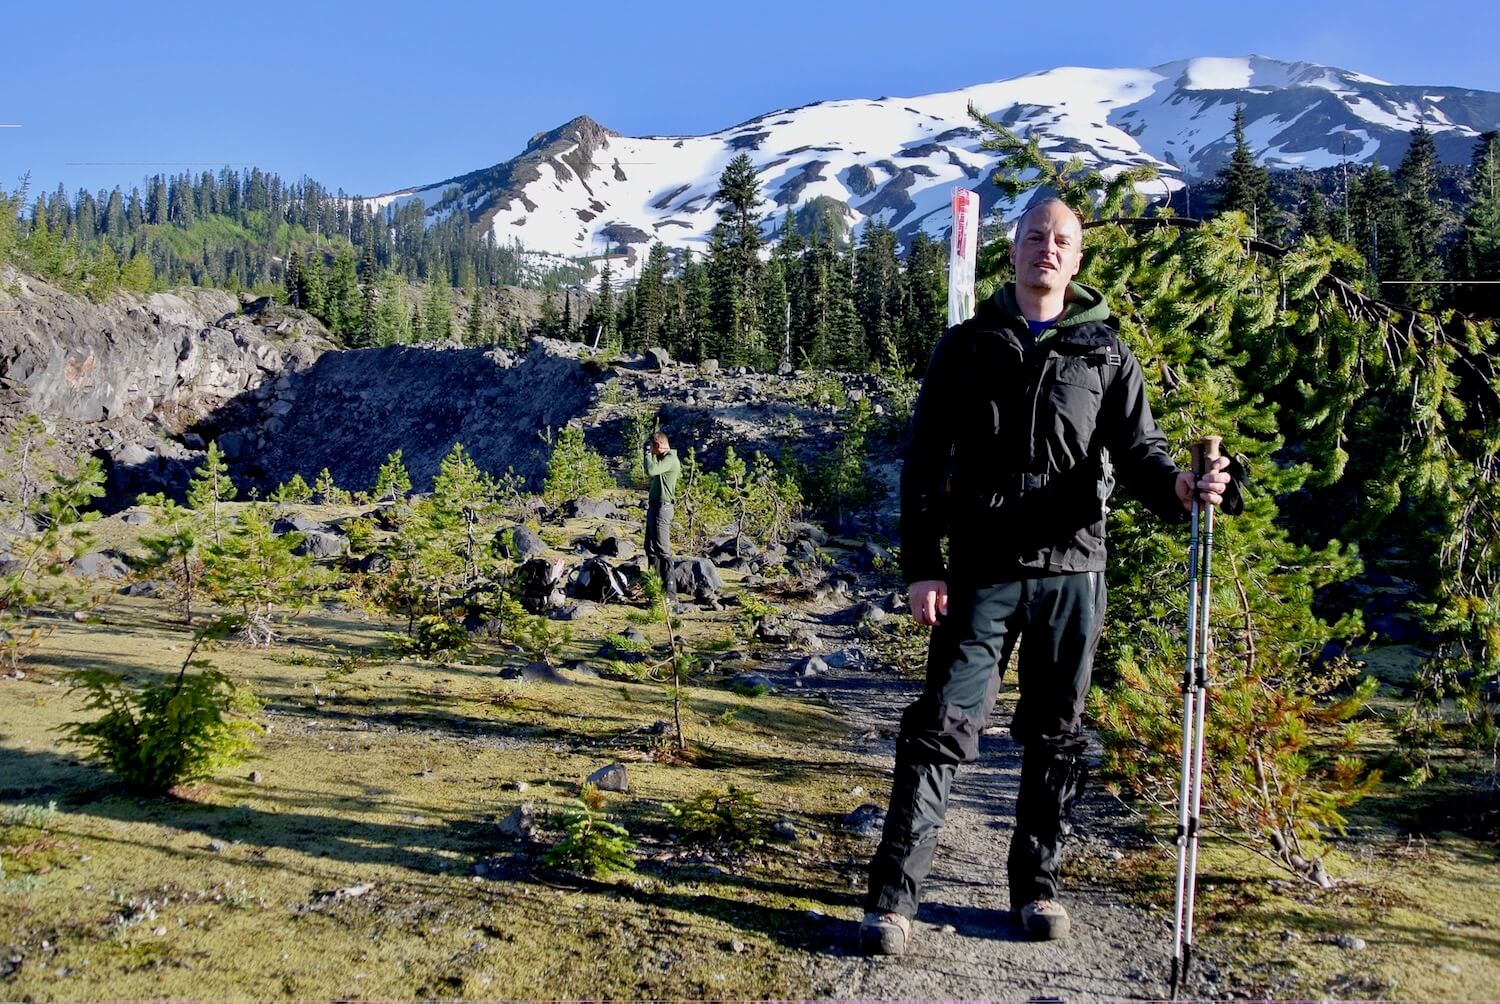 A photo of Matthew Kessi preparing to hike to the crater rim of Mount St. Helens.  He is holding hiking poles and wearing black waterproof gear.  The mountain is still mostly snow covered with patches of gray rock and in the foreground small fir trees pop up from a mossy open trail.  